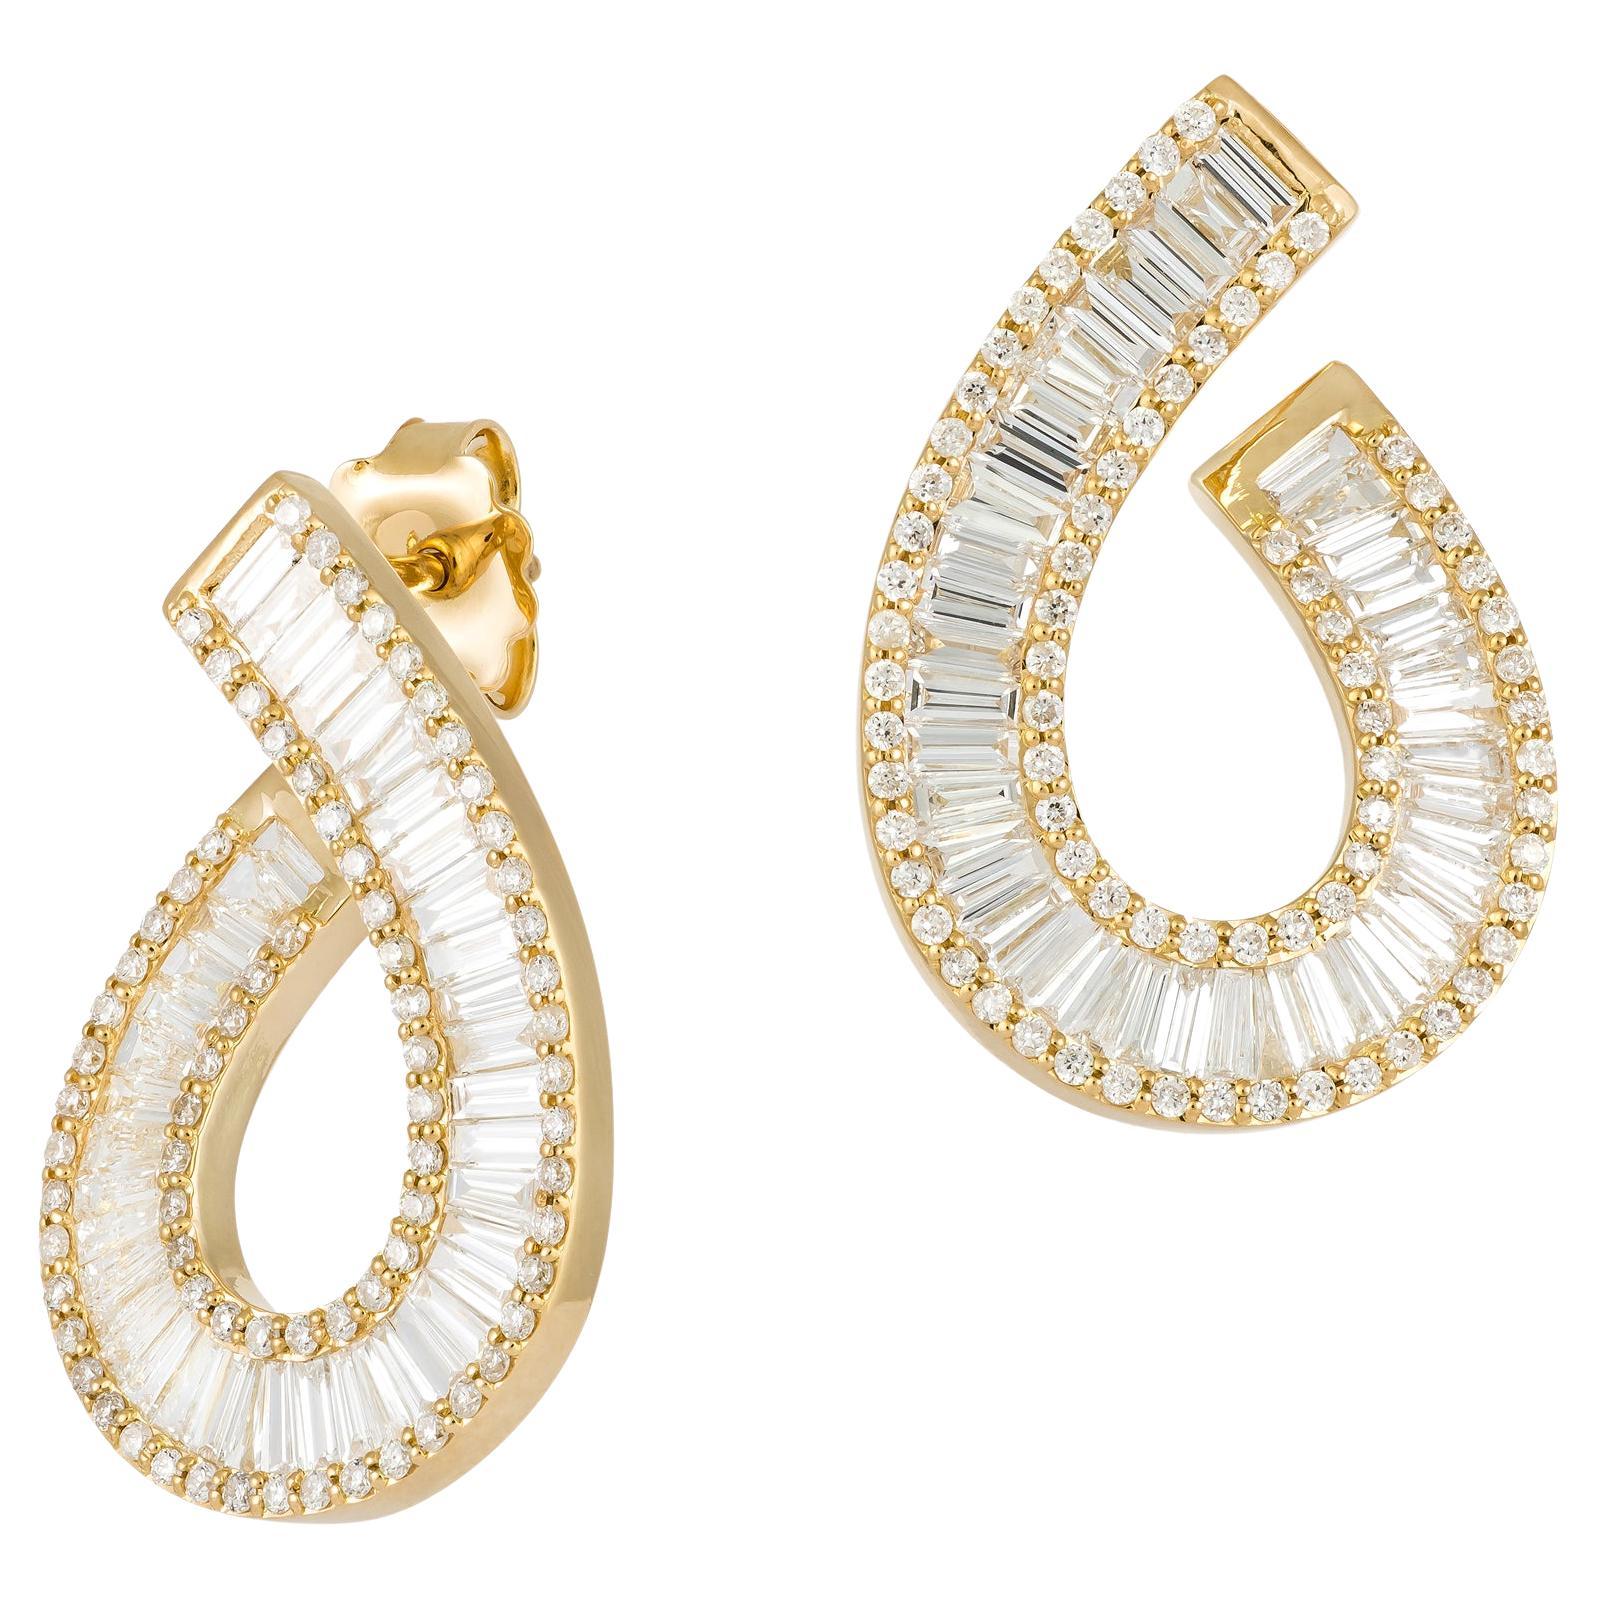 Chic Yellow Gold 18K Earrings Diamond For Her